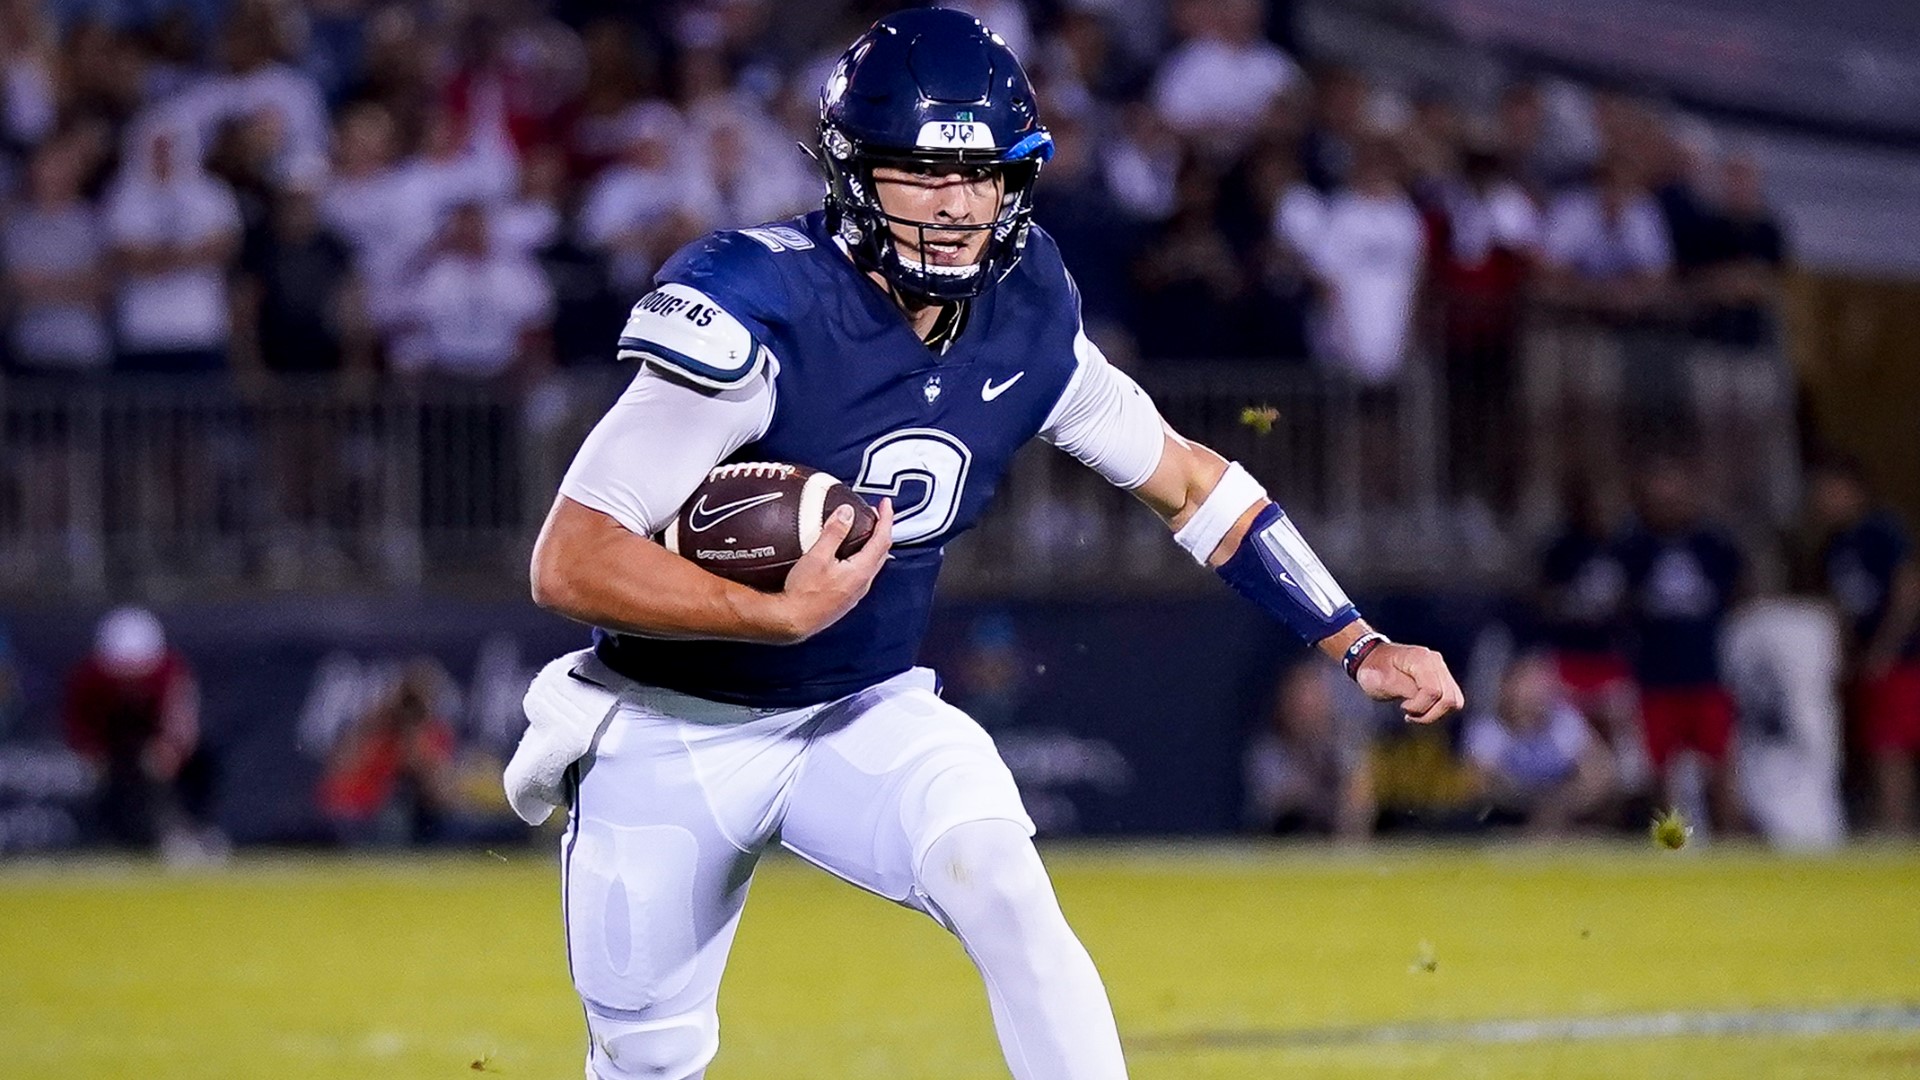 Joe Fagnano, a transfer from Maine, was injured during a designed quarterback run in the second quarter of last Saturday's 35-14 loss in Atlanta.